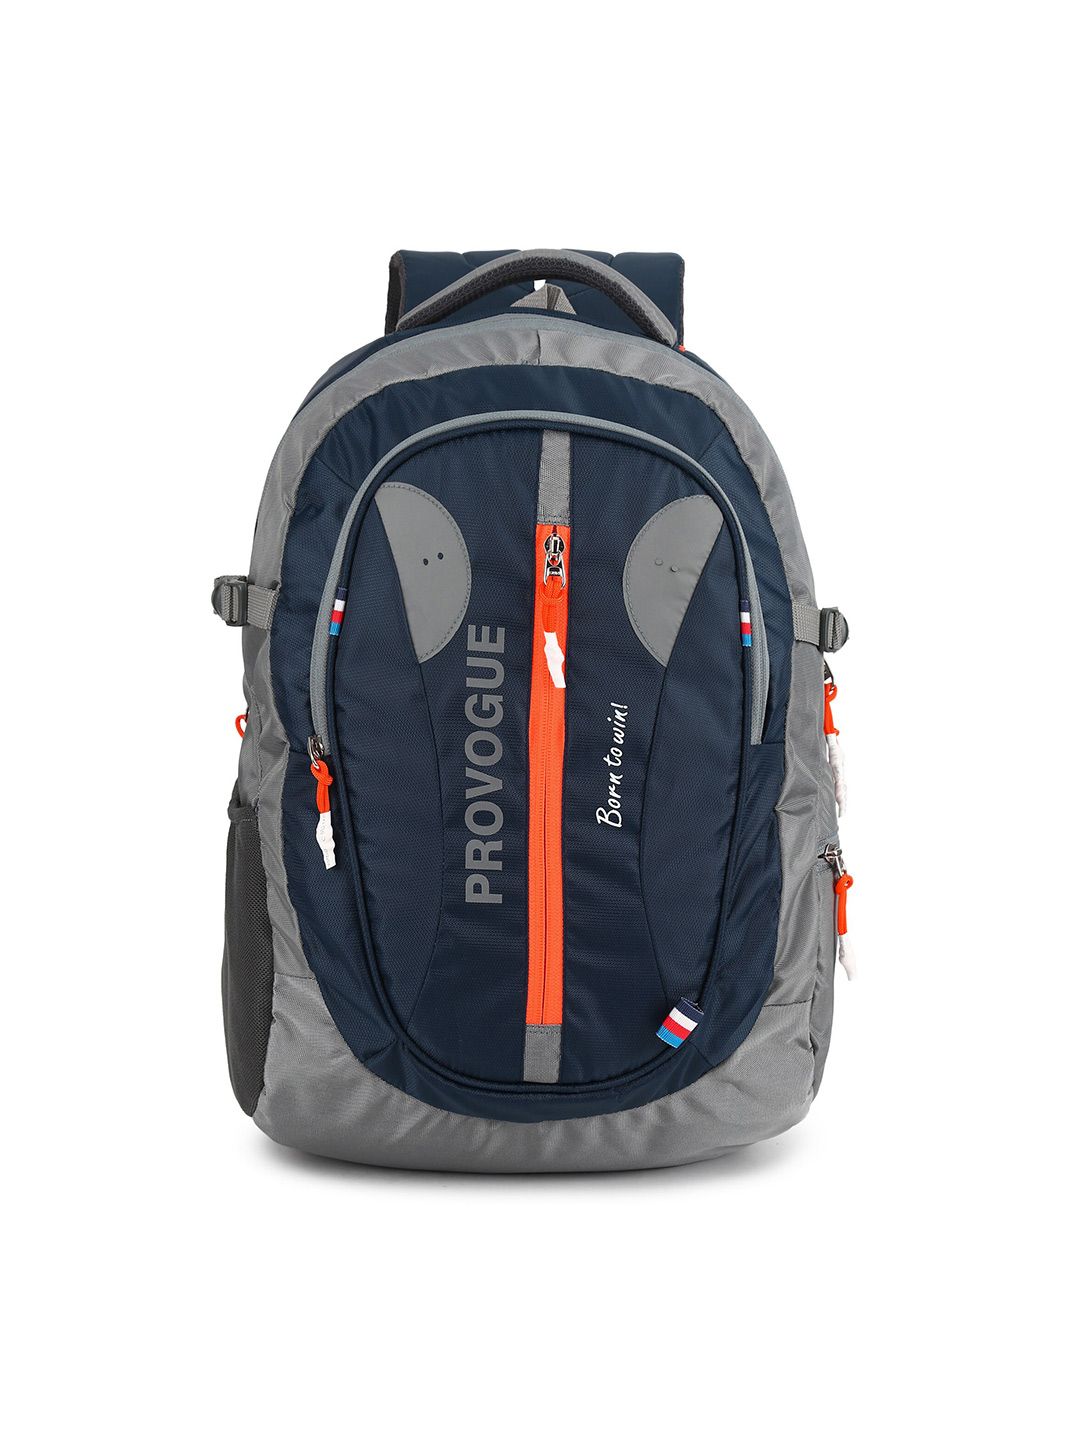 Provogue Colourblocked Backpack with Reflective Strip